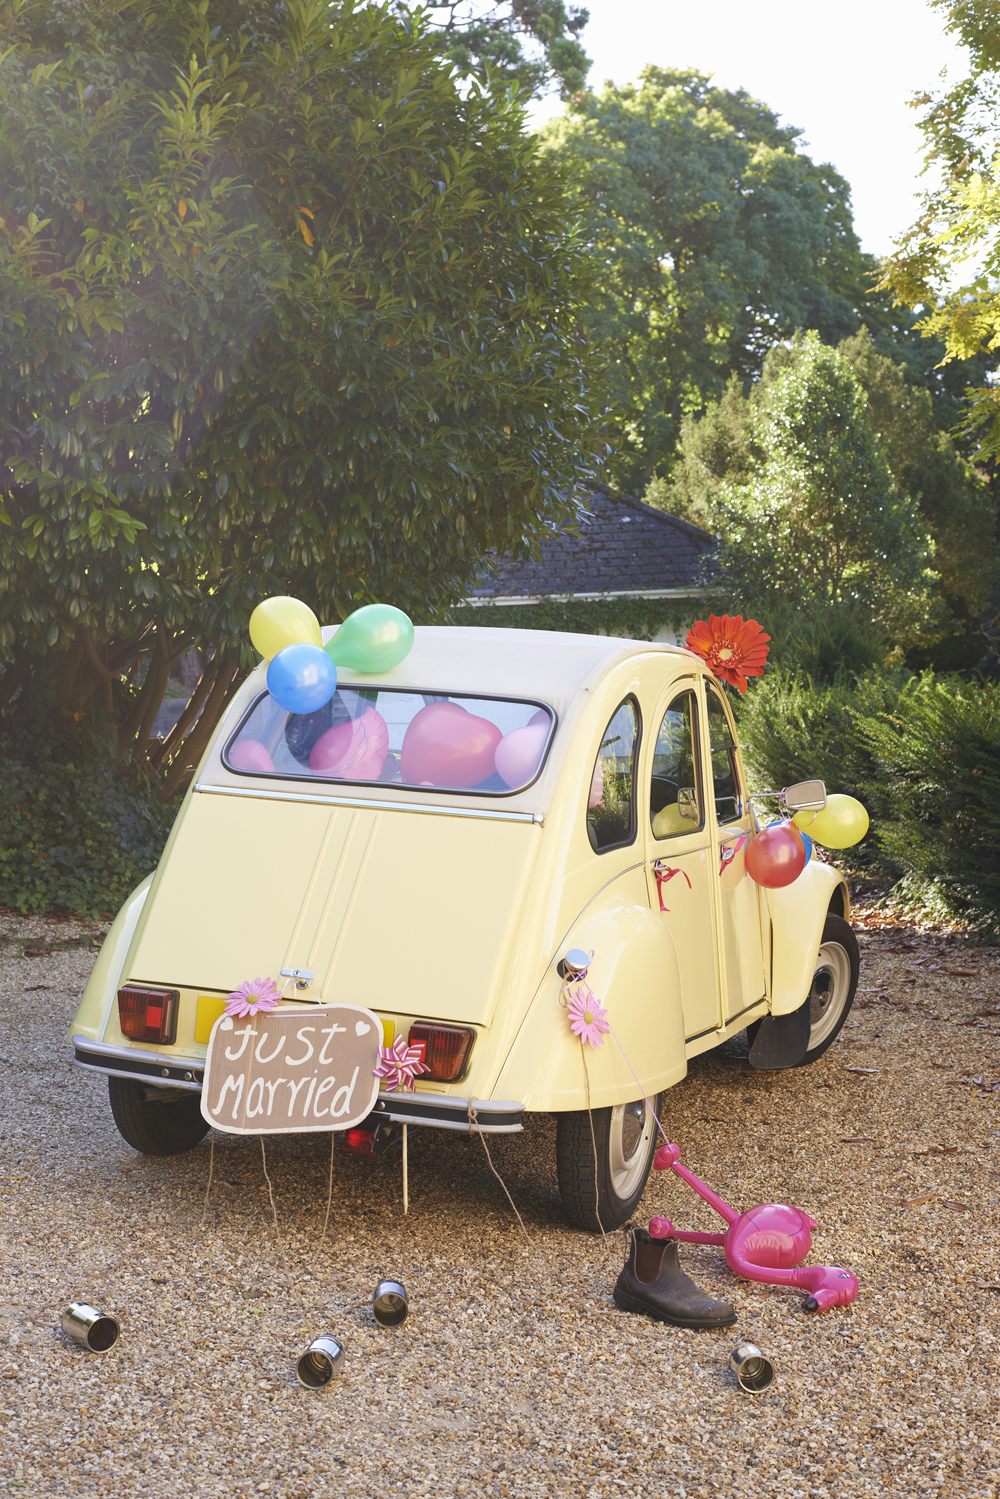 Vintage car decorated for wedding